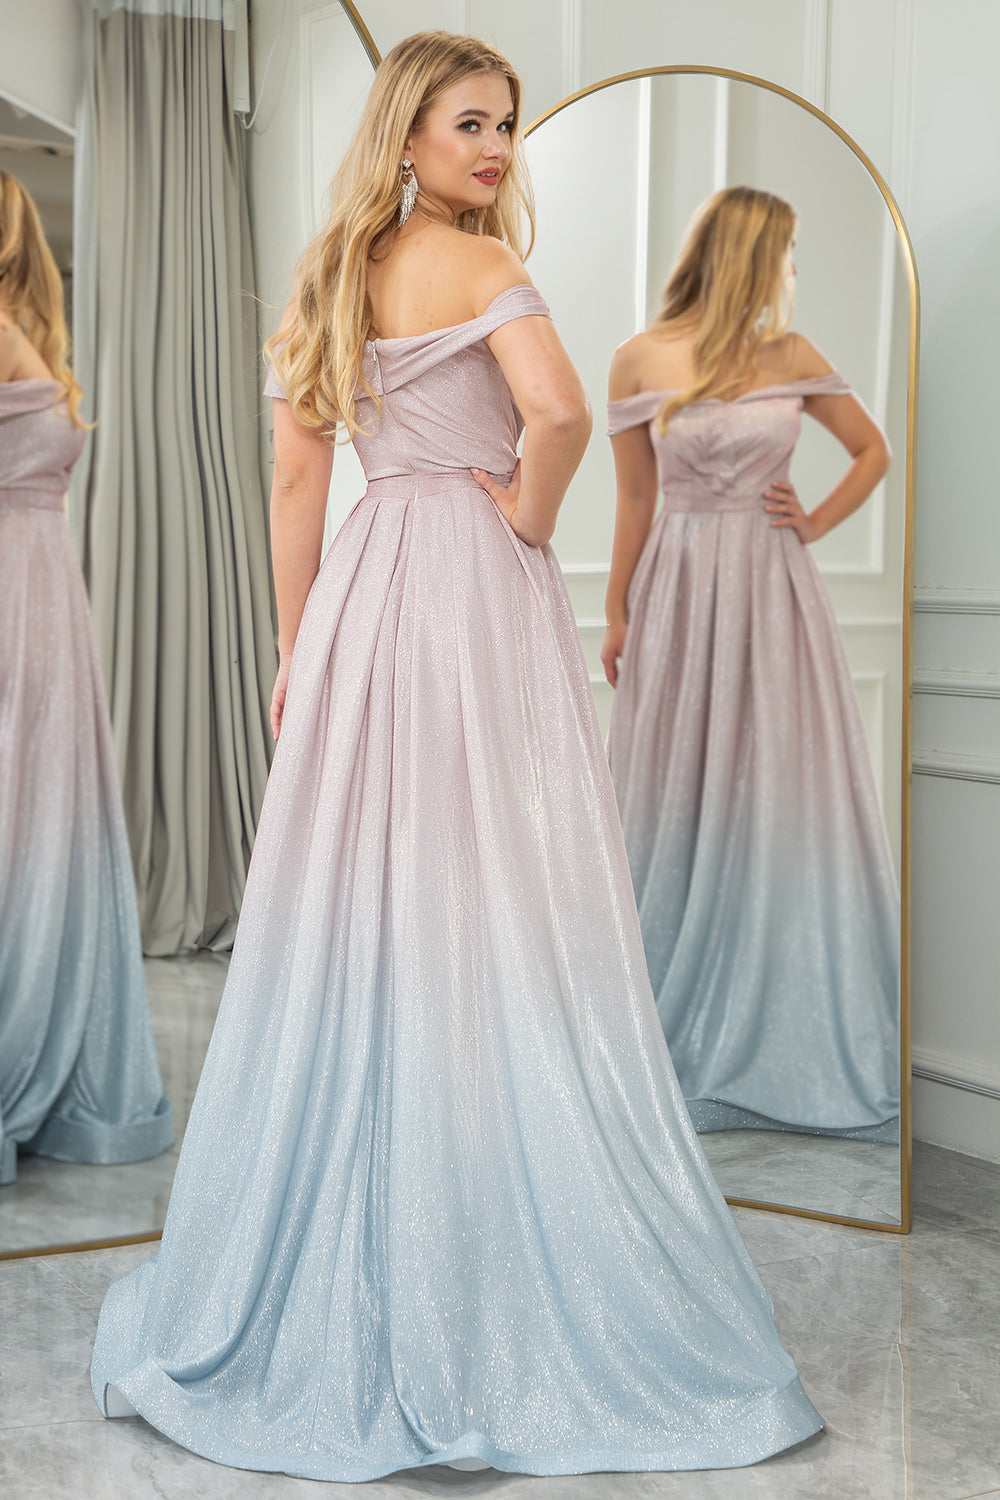 Metallic A-Line Off the Shoulder Sparkly Gradient Elegant Pleated Prom Dress